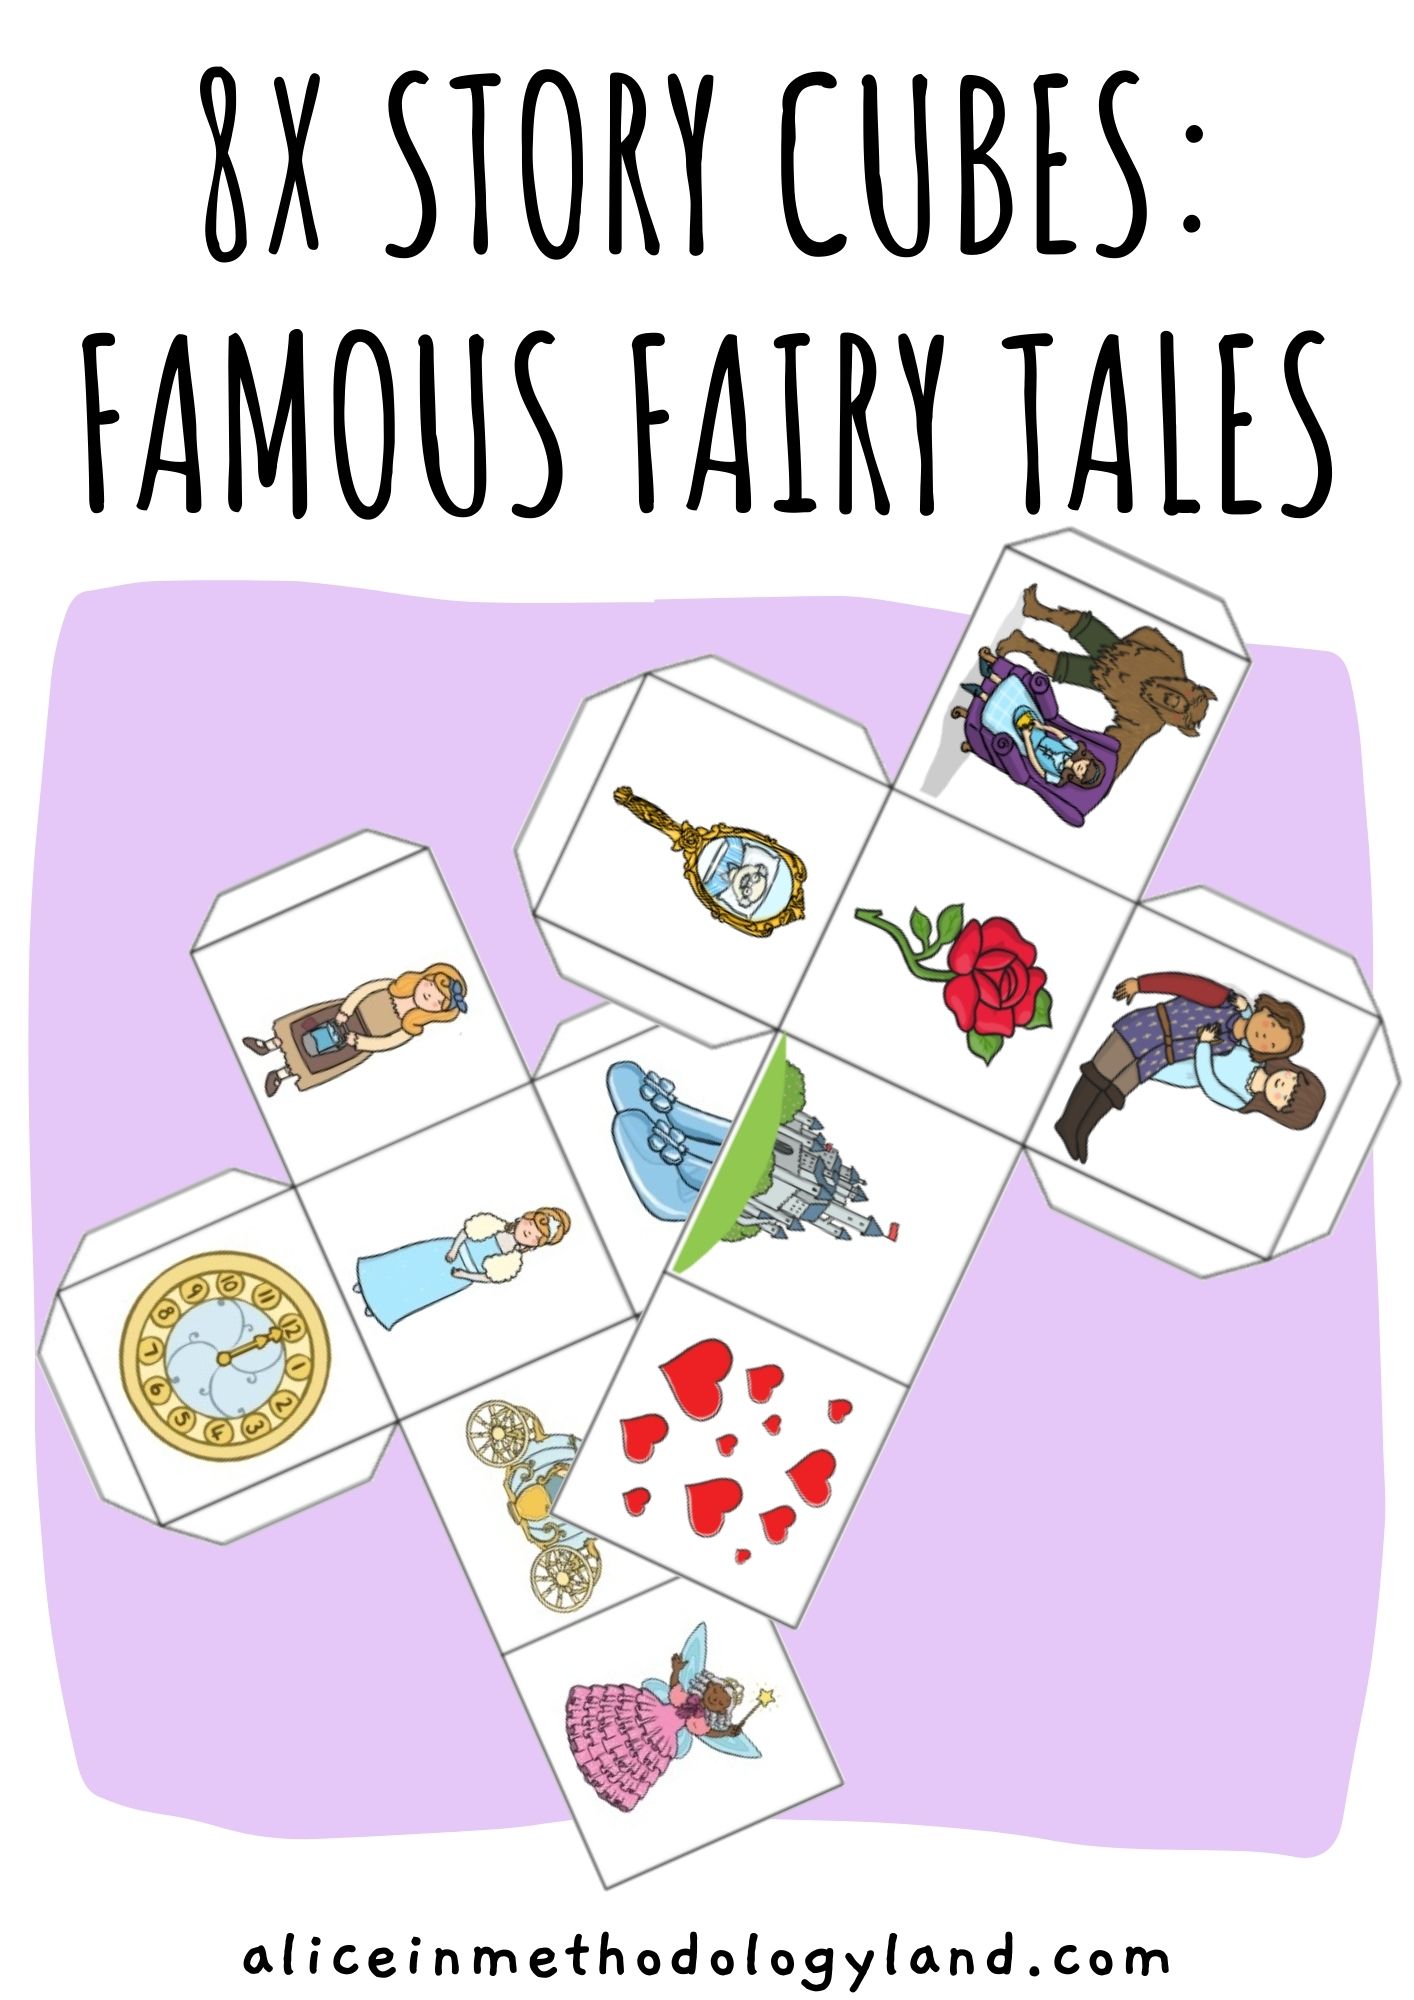 https://materials.aliceinmethodologyland.com/wp-content/uploads/2021/08/Story-cubes-famous-fairy-tales-aliceinmethodologyland.com-free-ESL-materials-1.jpg